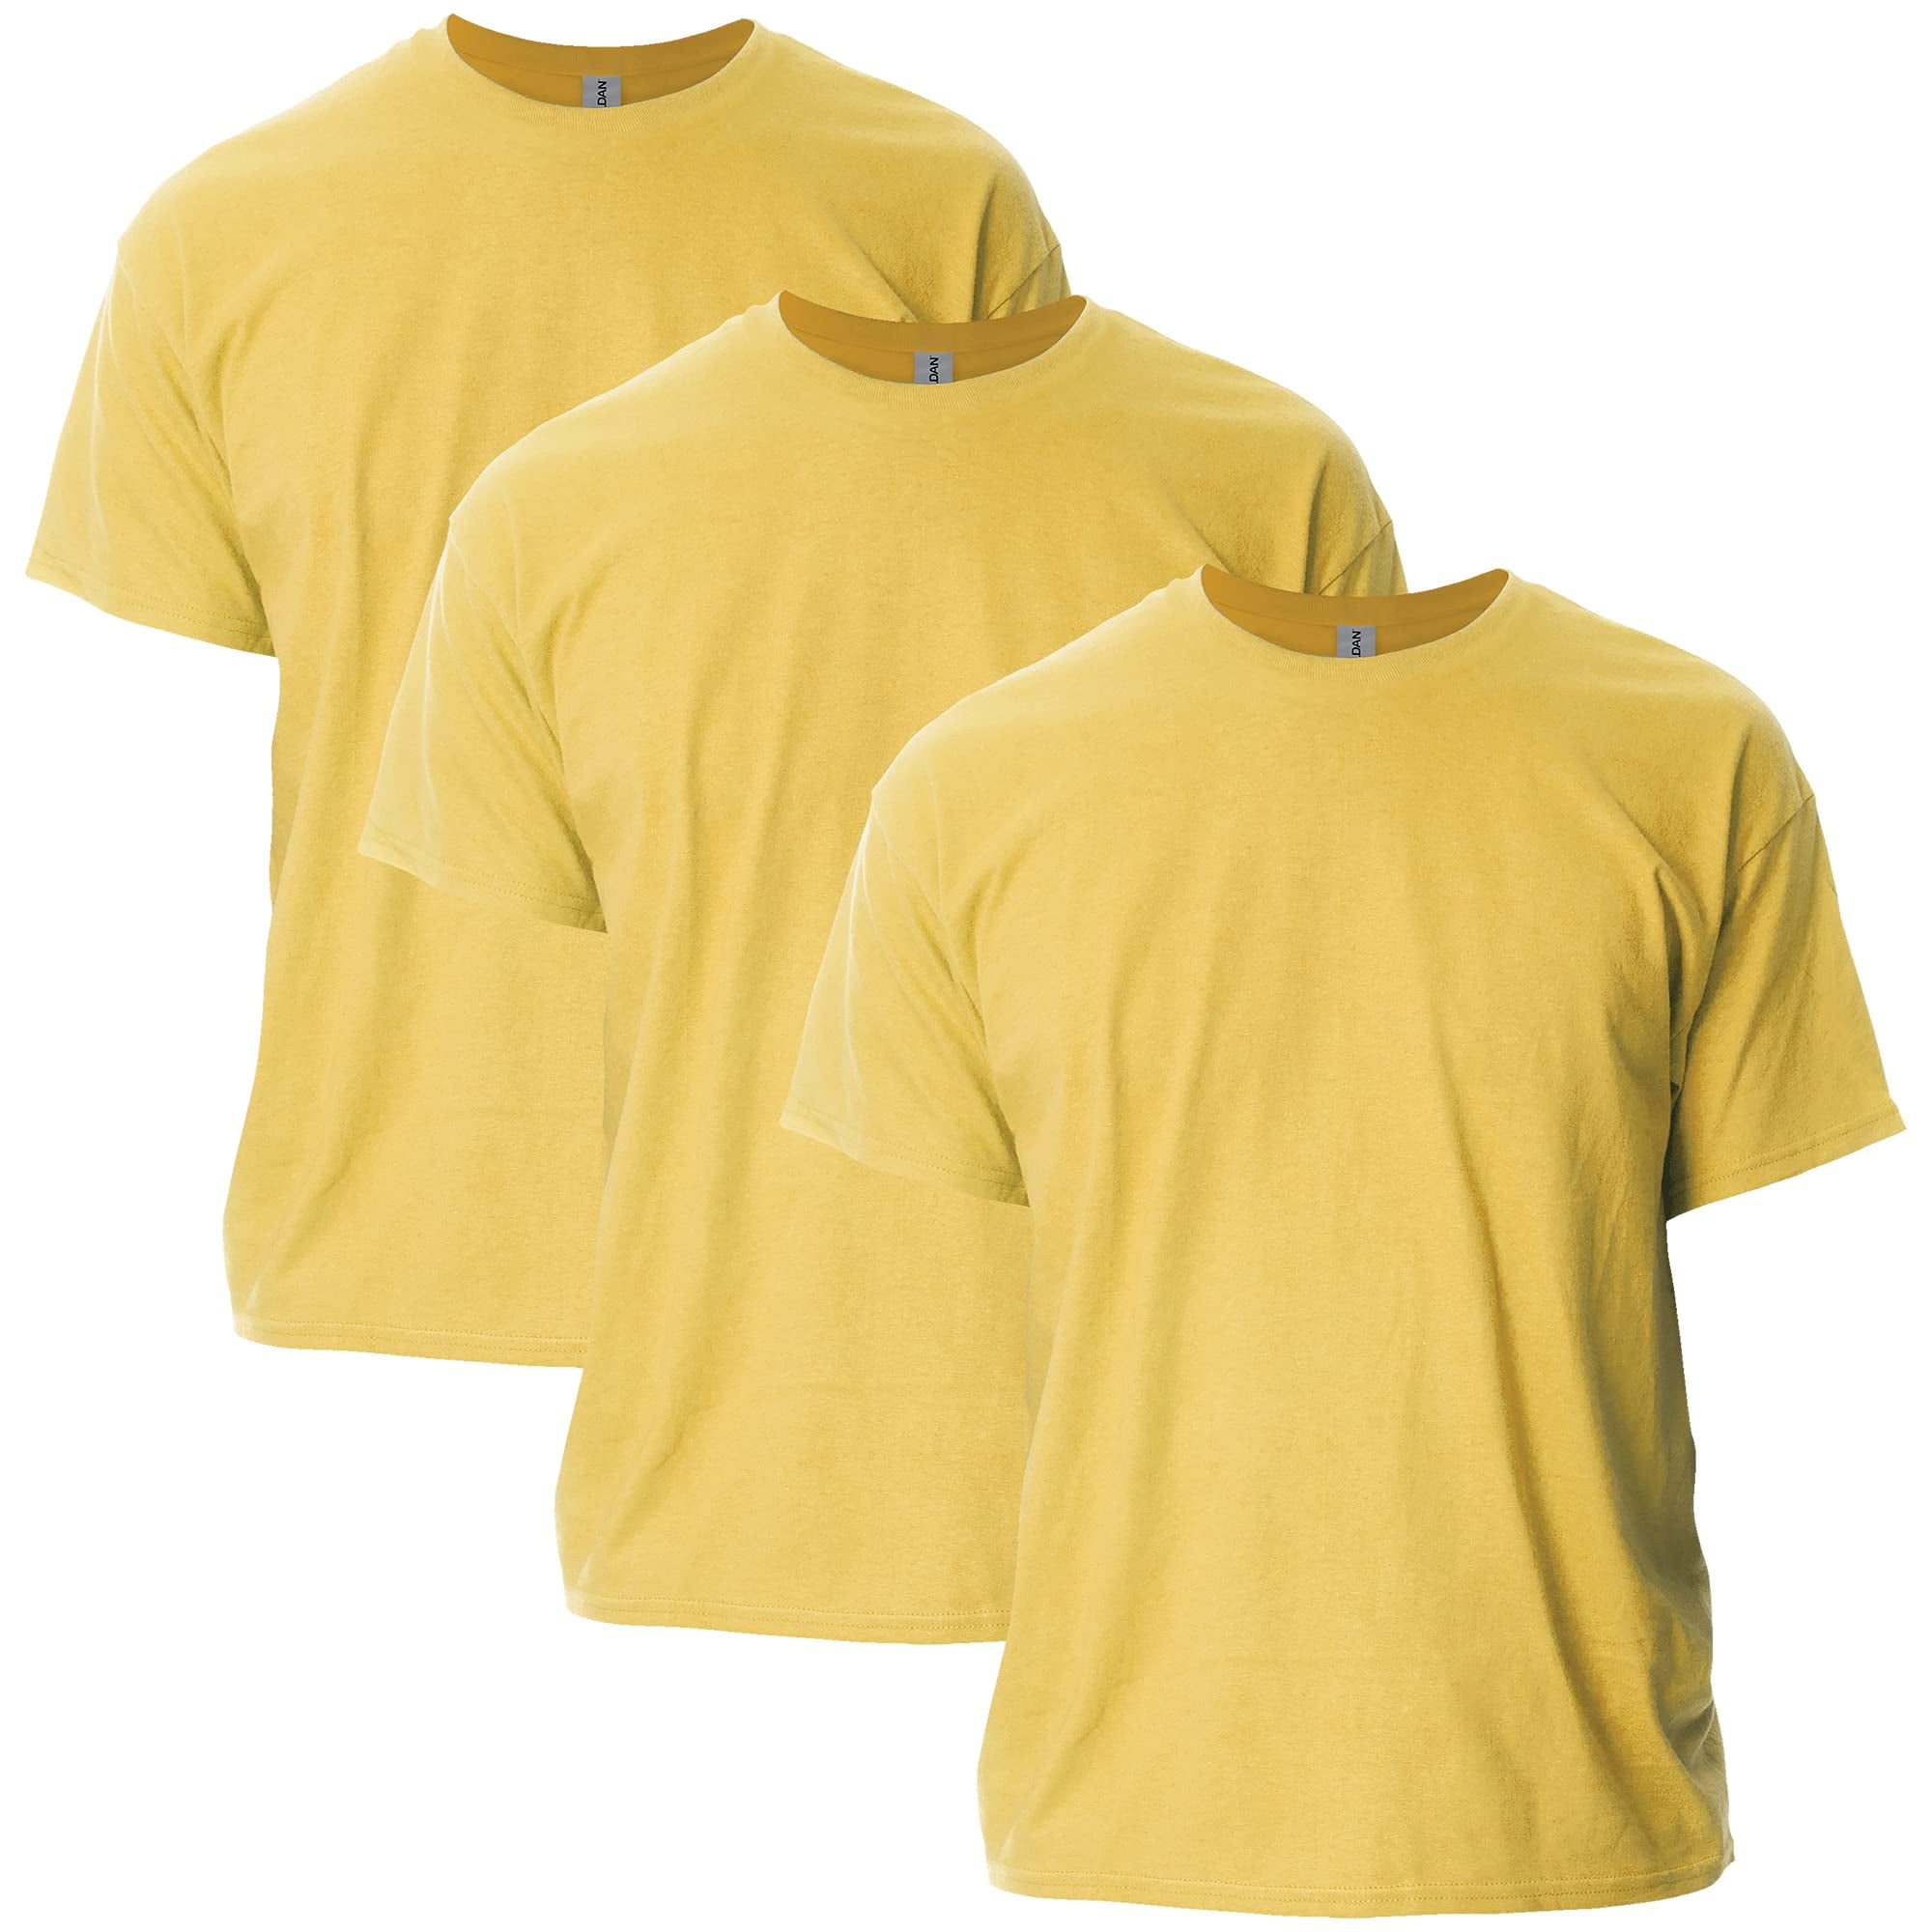 Gildan Adult Ultra Cotton T-Shirt, Style G2000, Multipack, Gold 3-Pack,  X-Large 